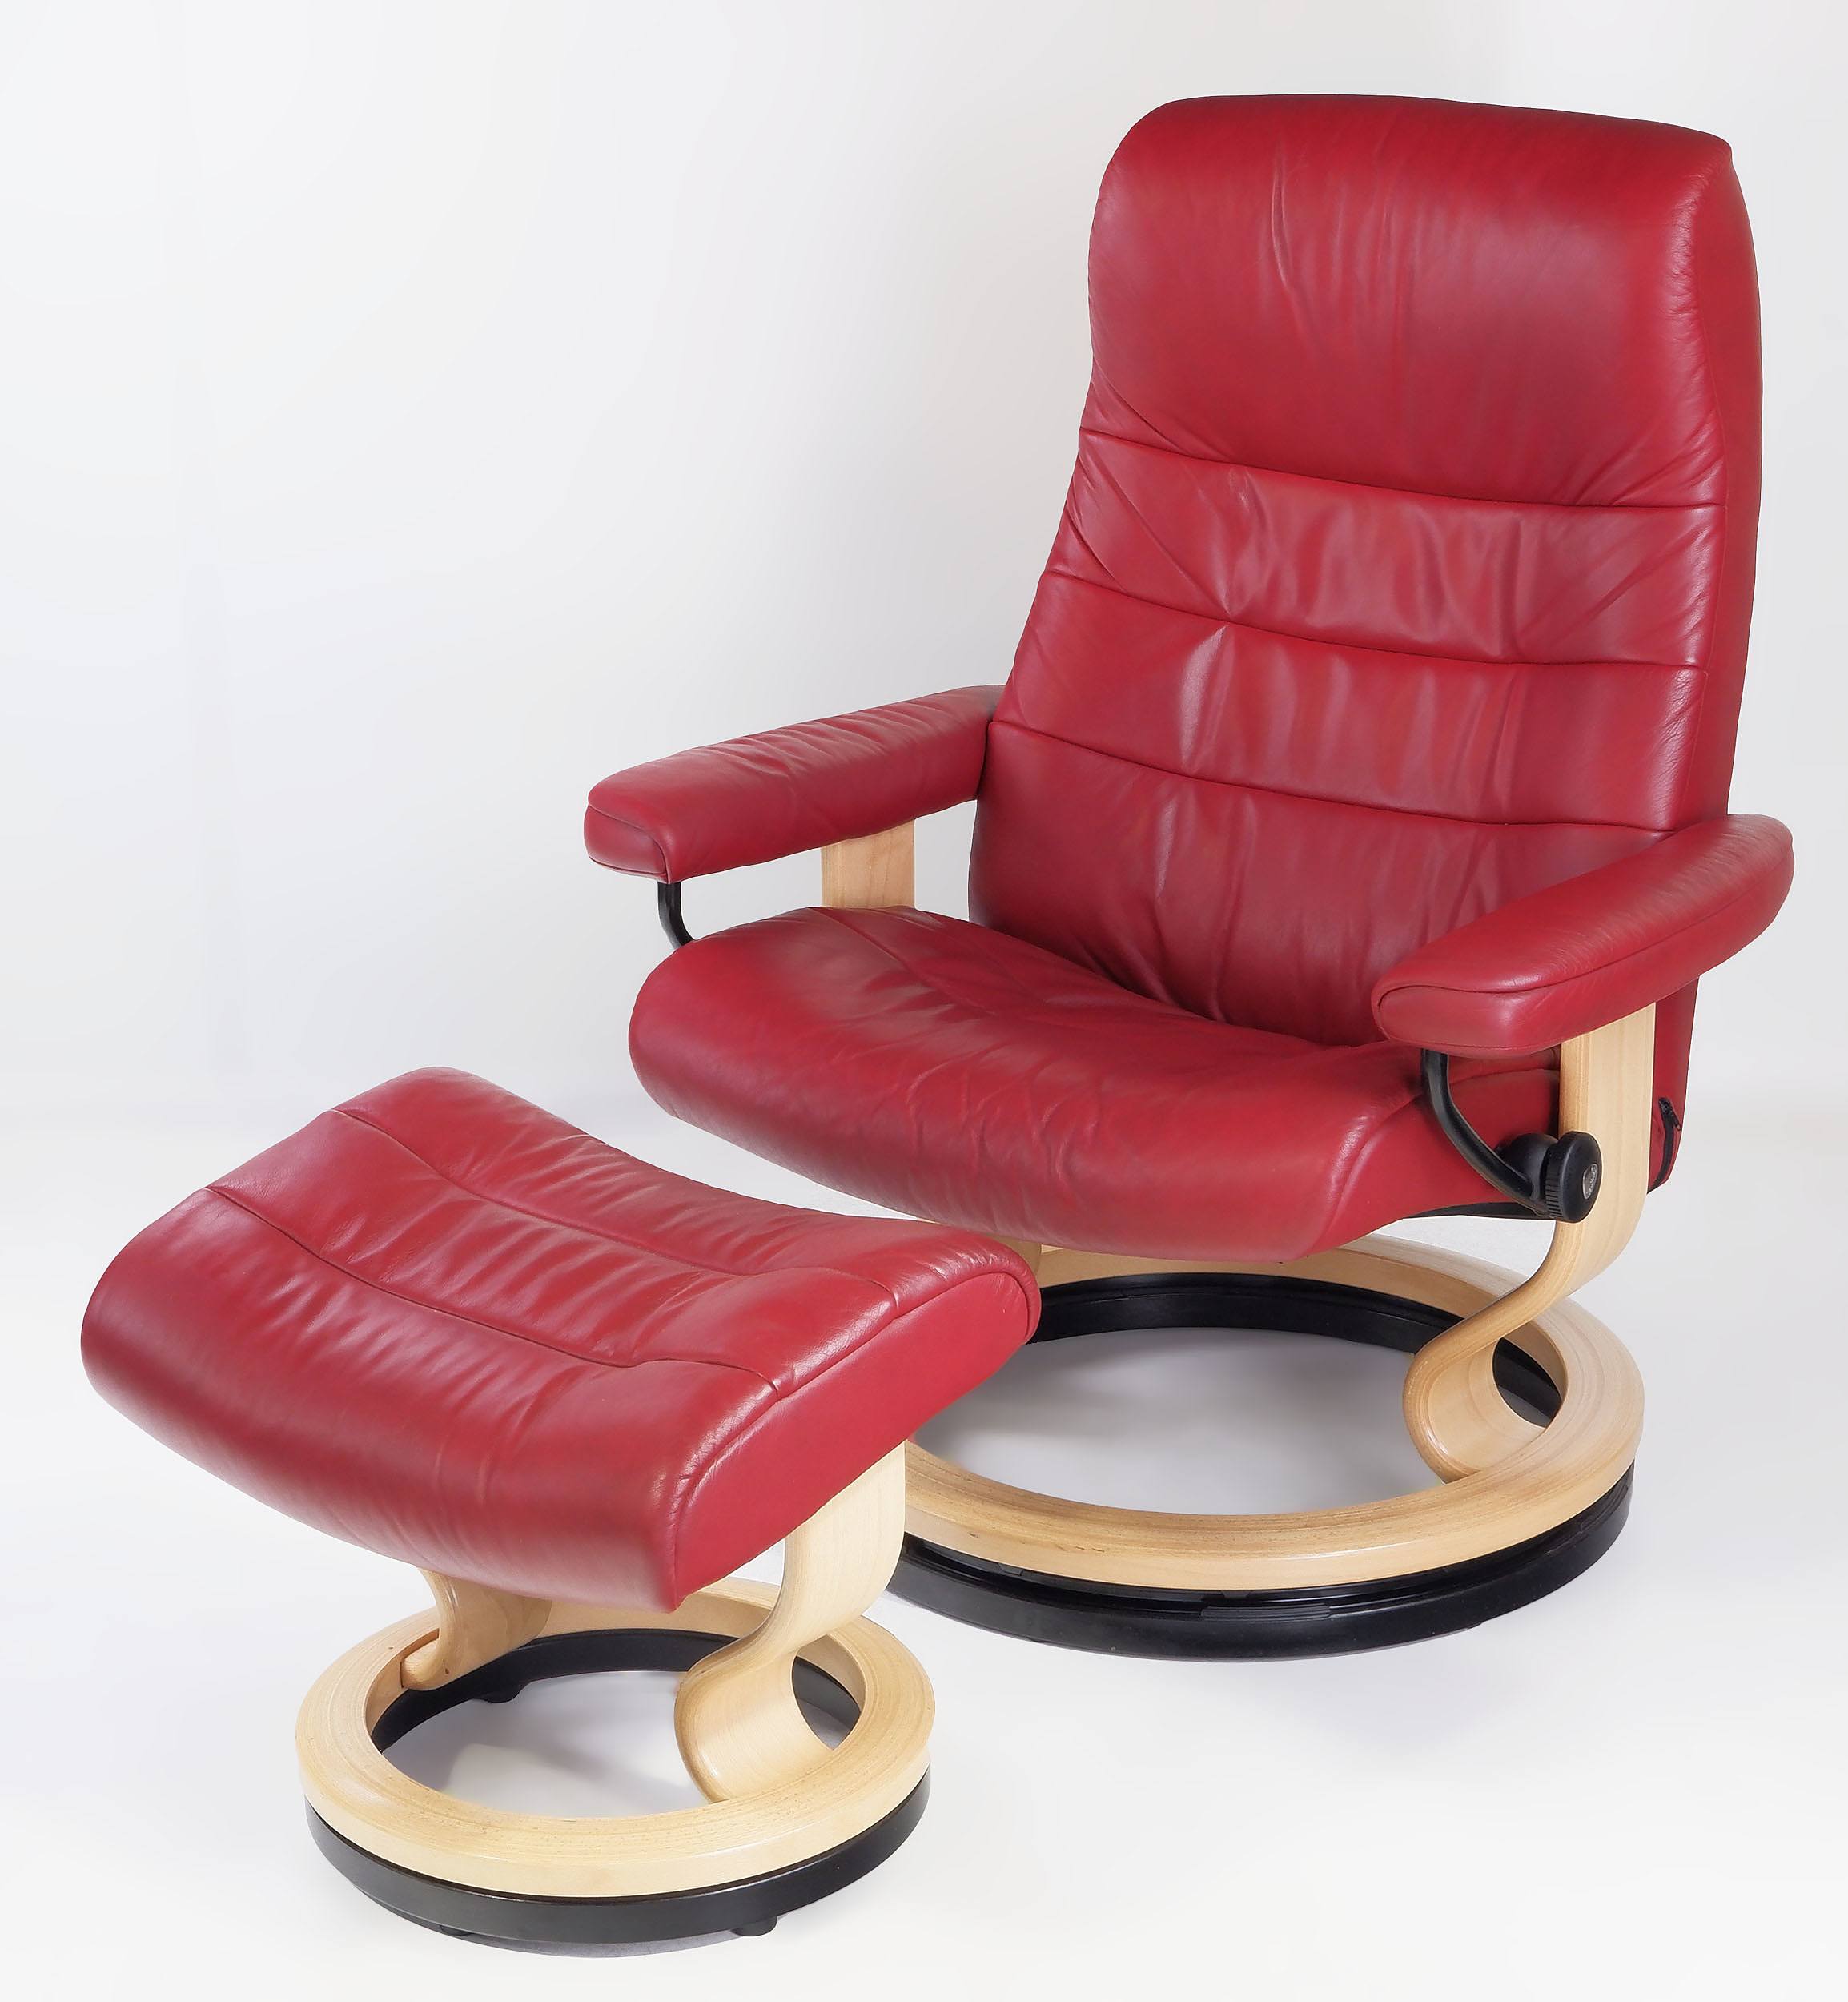 'Stressless Norwegian Red Leather Upholstered Reclining Armchair and Ottoman'